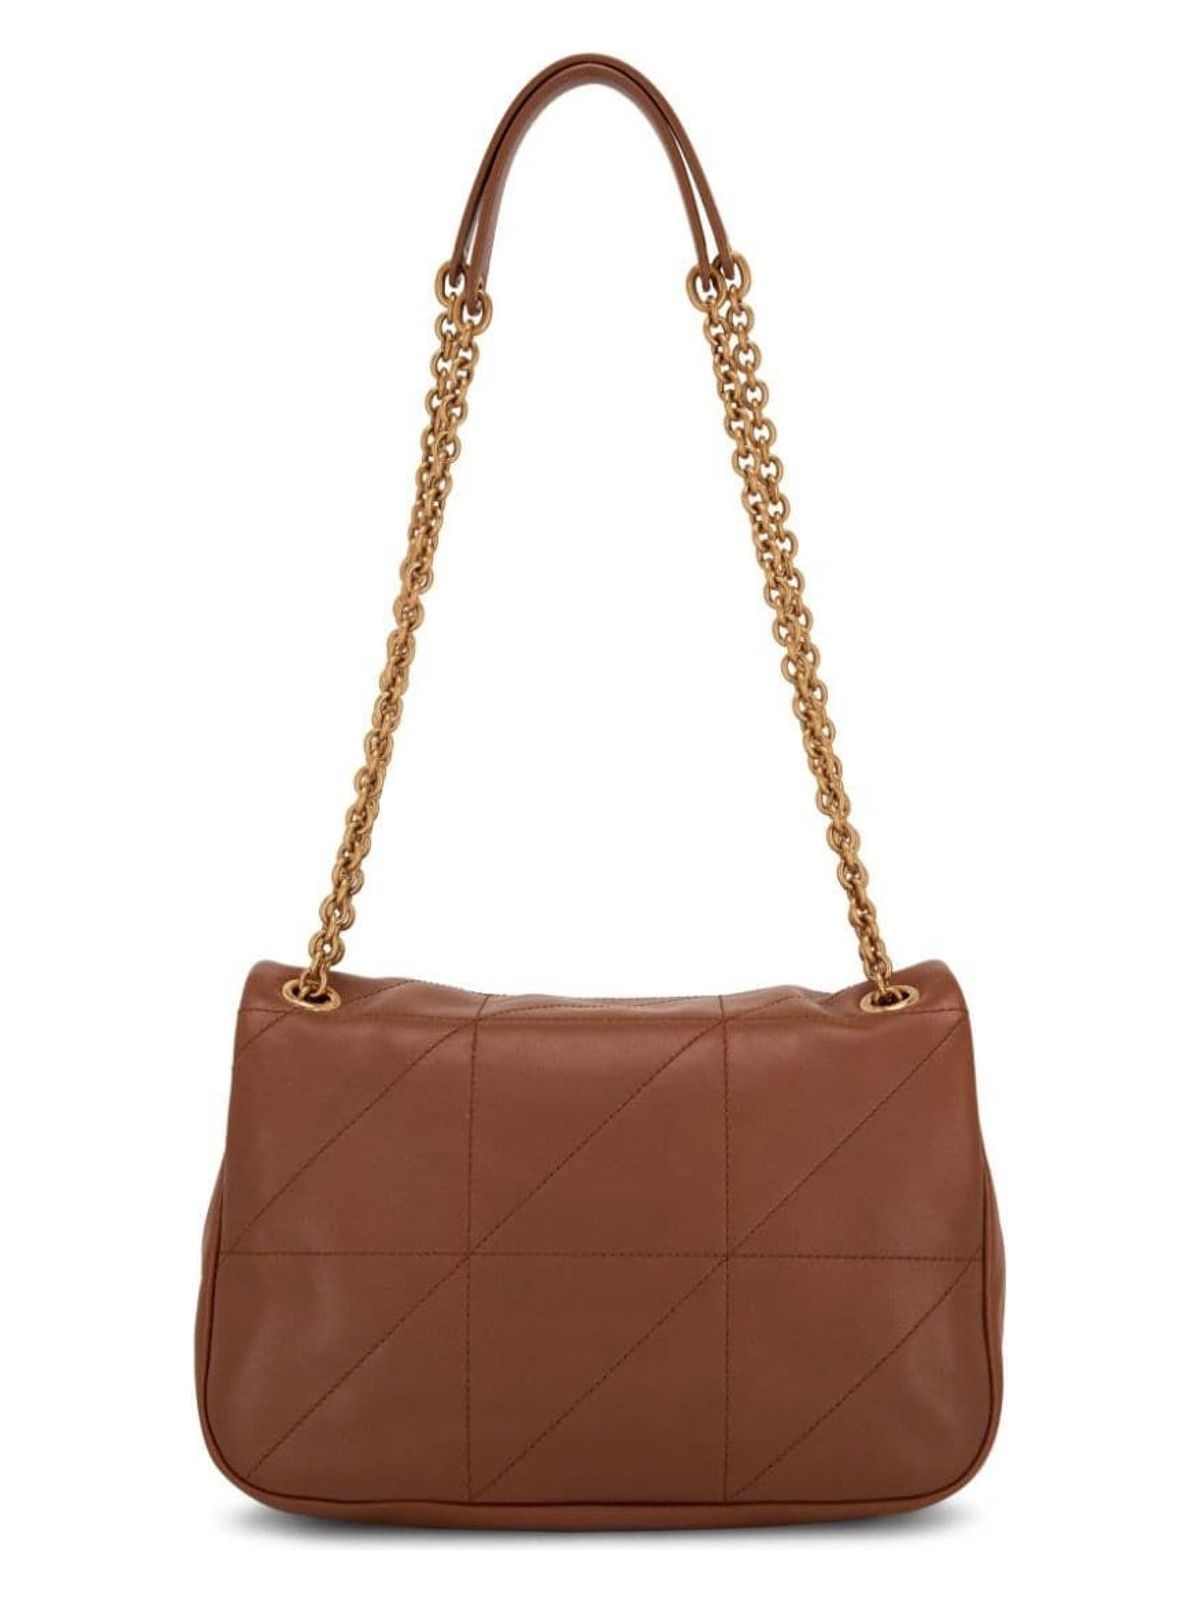 2186 SAINT LAURENT JAMIE S CAMEL QUILTED BAG WITH GOLD LOGO